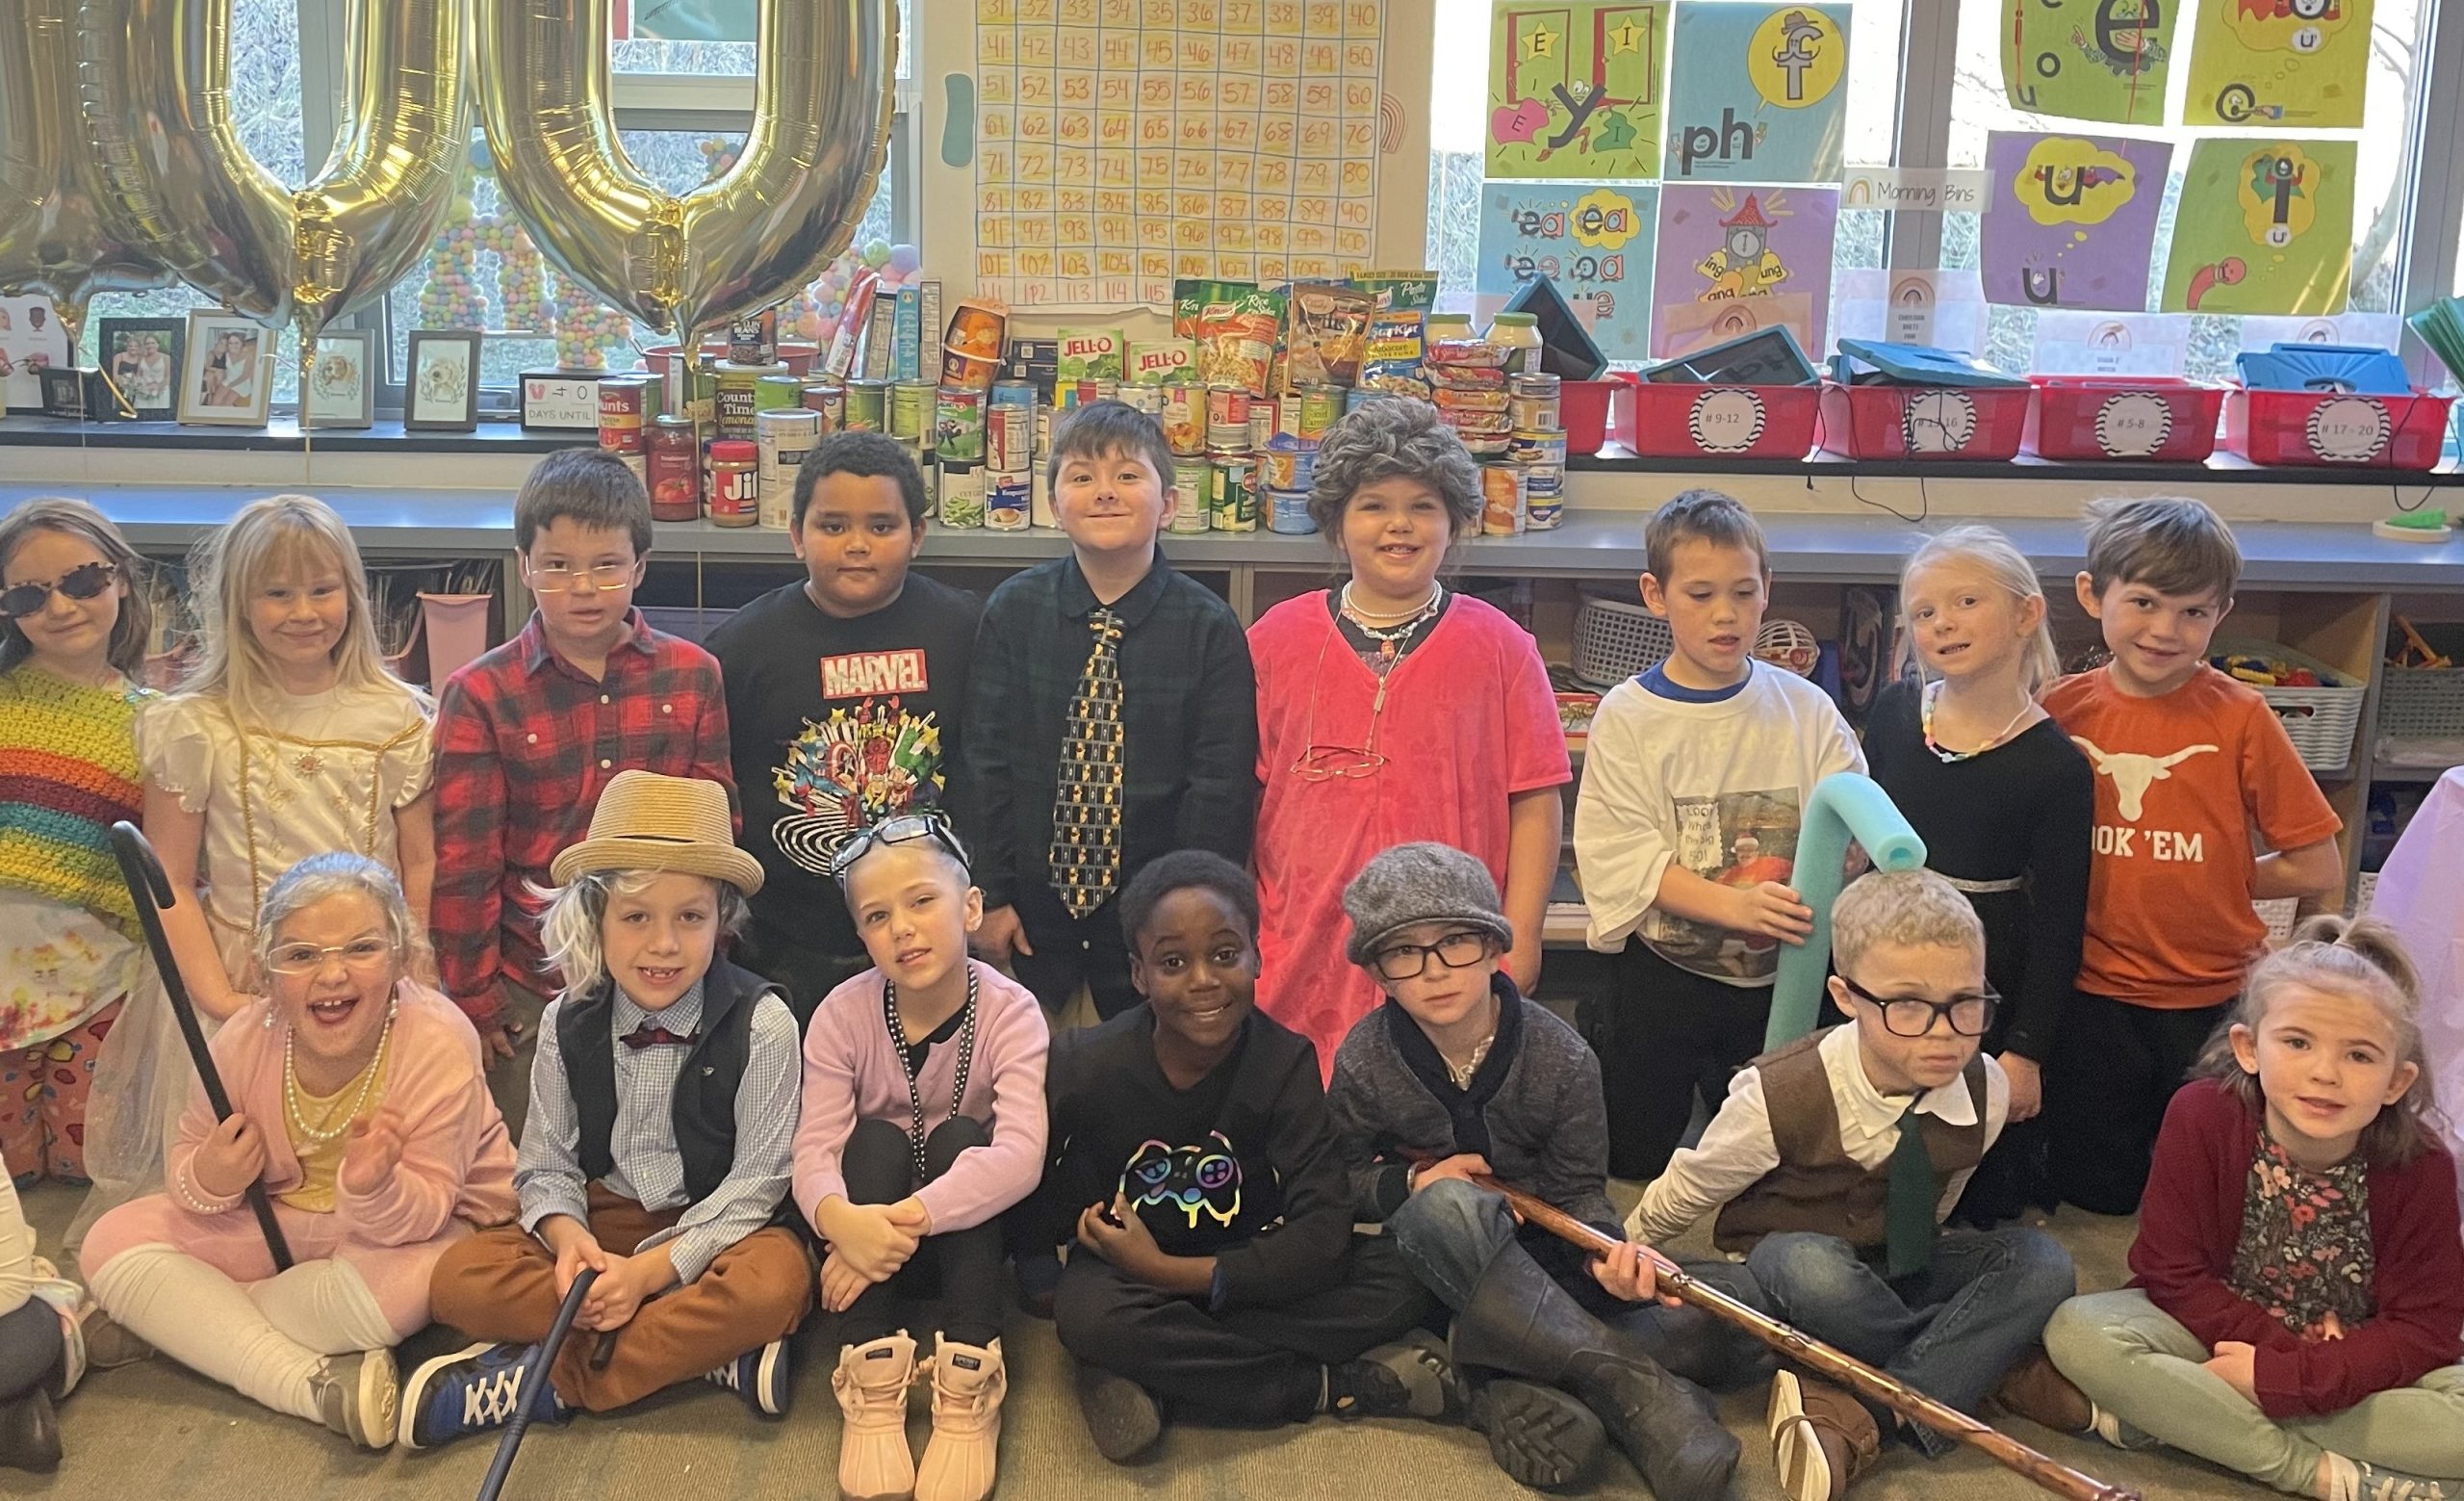 Miss Poltonavage’s class dressed up for the 100th day of school